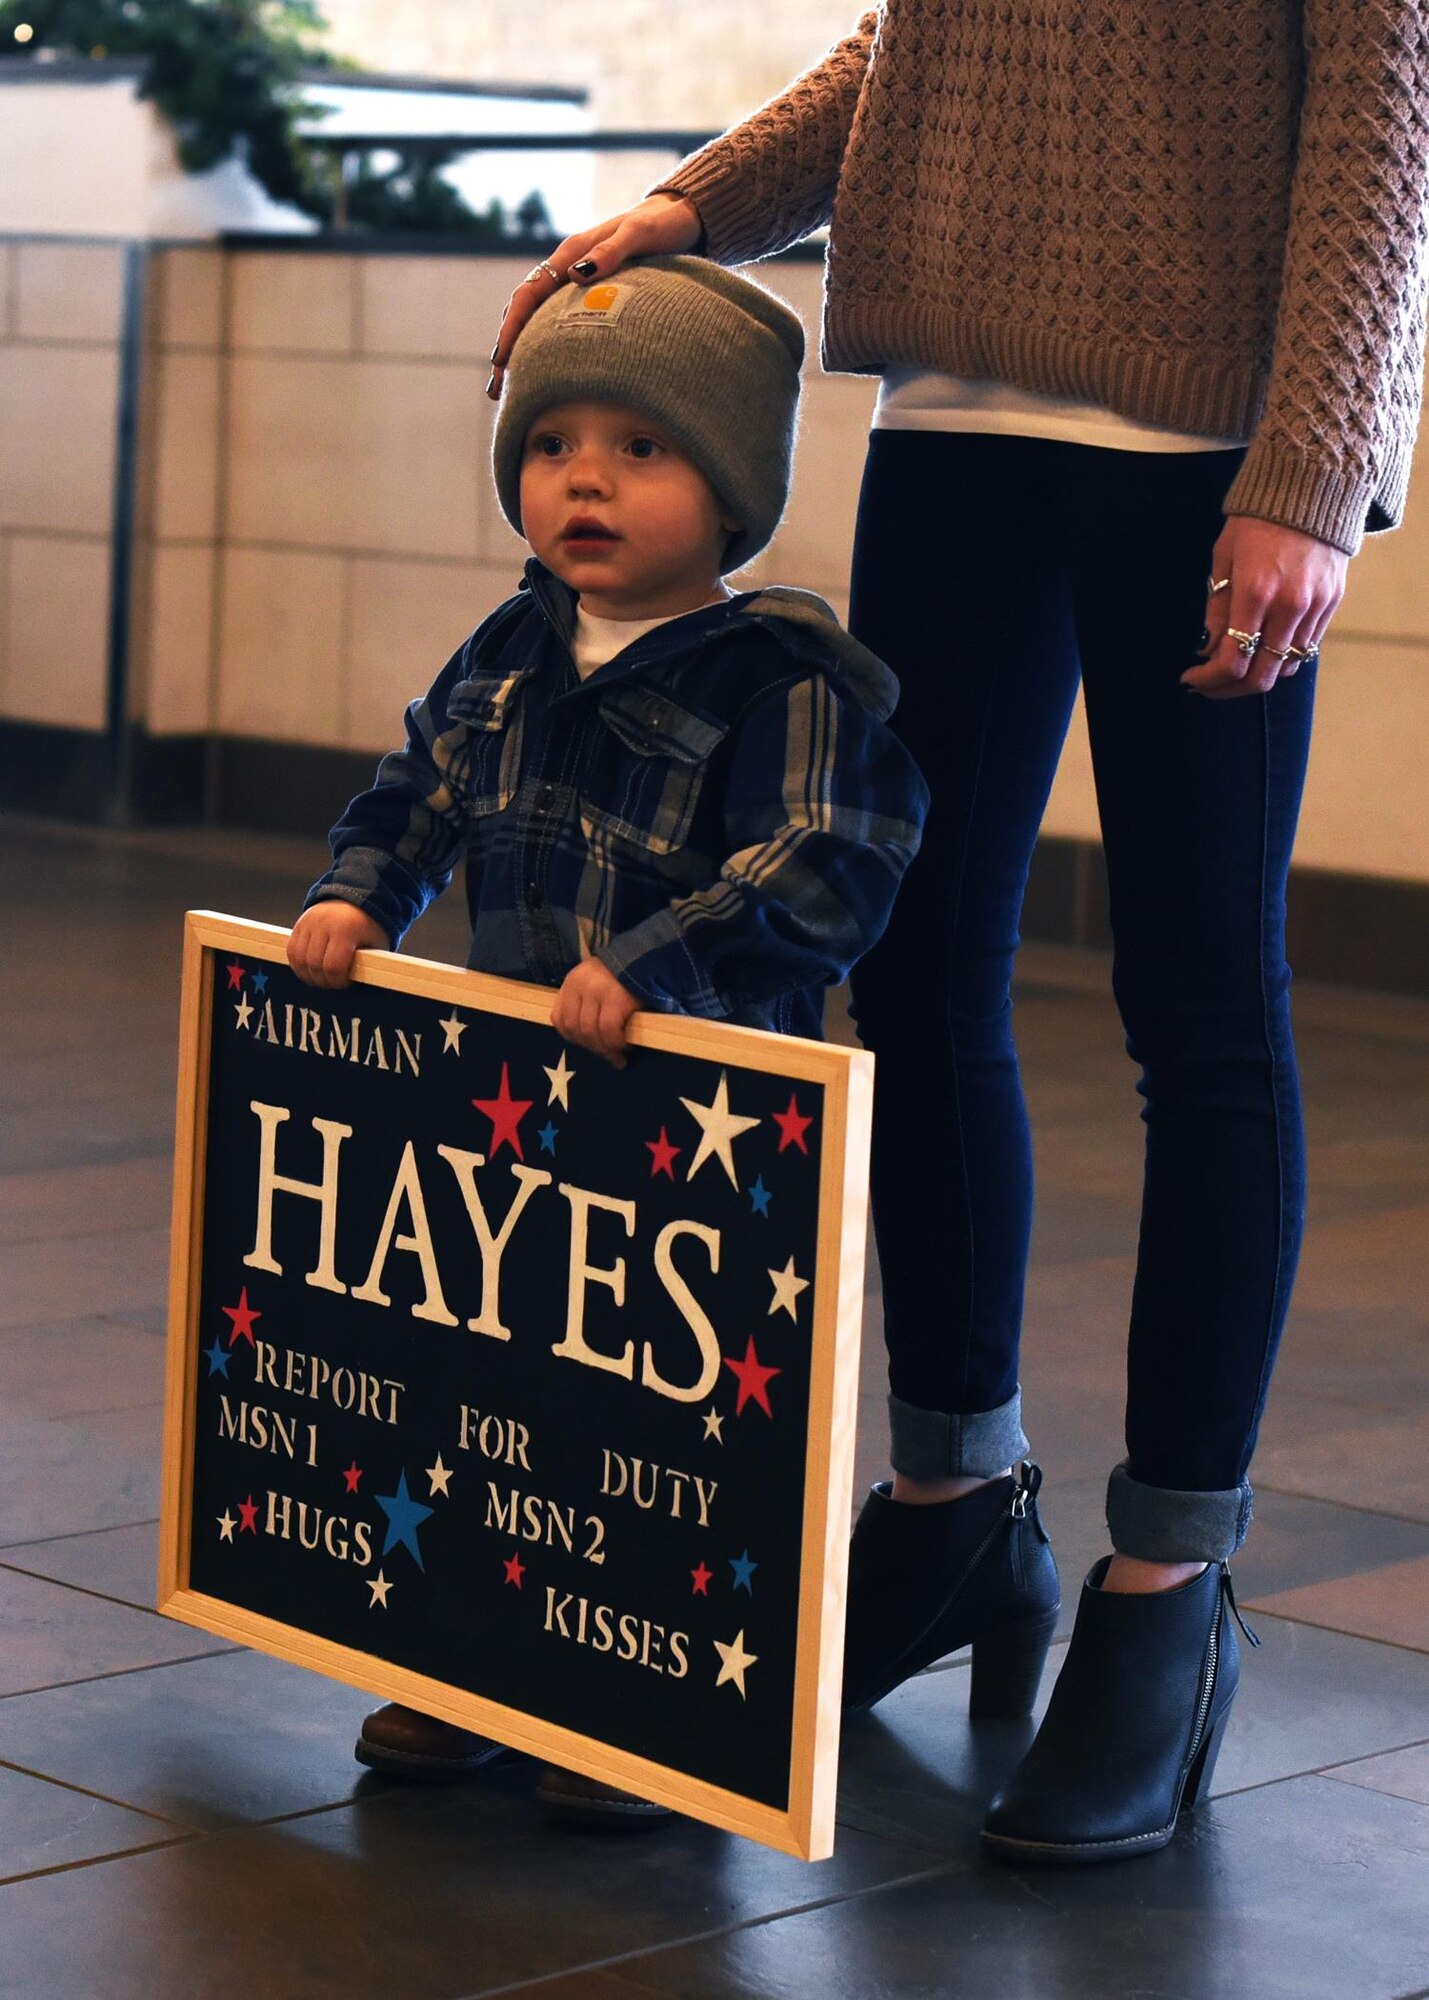 Steven Hayes Jr., 2, holds a sign for his dad Dec. 9, 2016, in Grand Forks, N.D. Steven and his mom, Lane, spent the last six months separated from their father and husband Senior Airman Steven Hayes, 69th Maintenance Squadron aircraft maintenance journeyman, while he was deployed. (U.S. Air Force photo by Senior Airman Ryan Sparks)